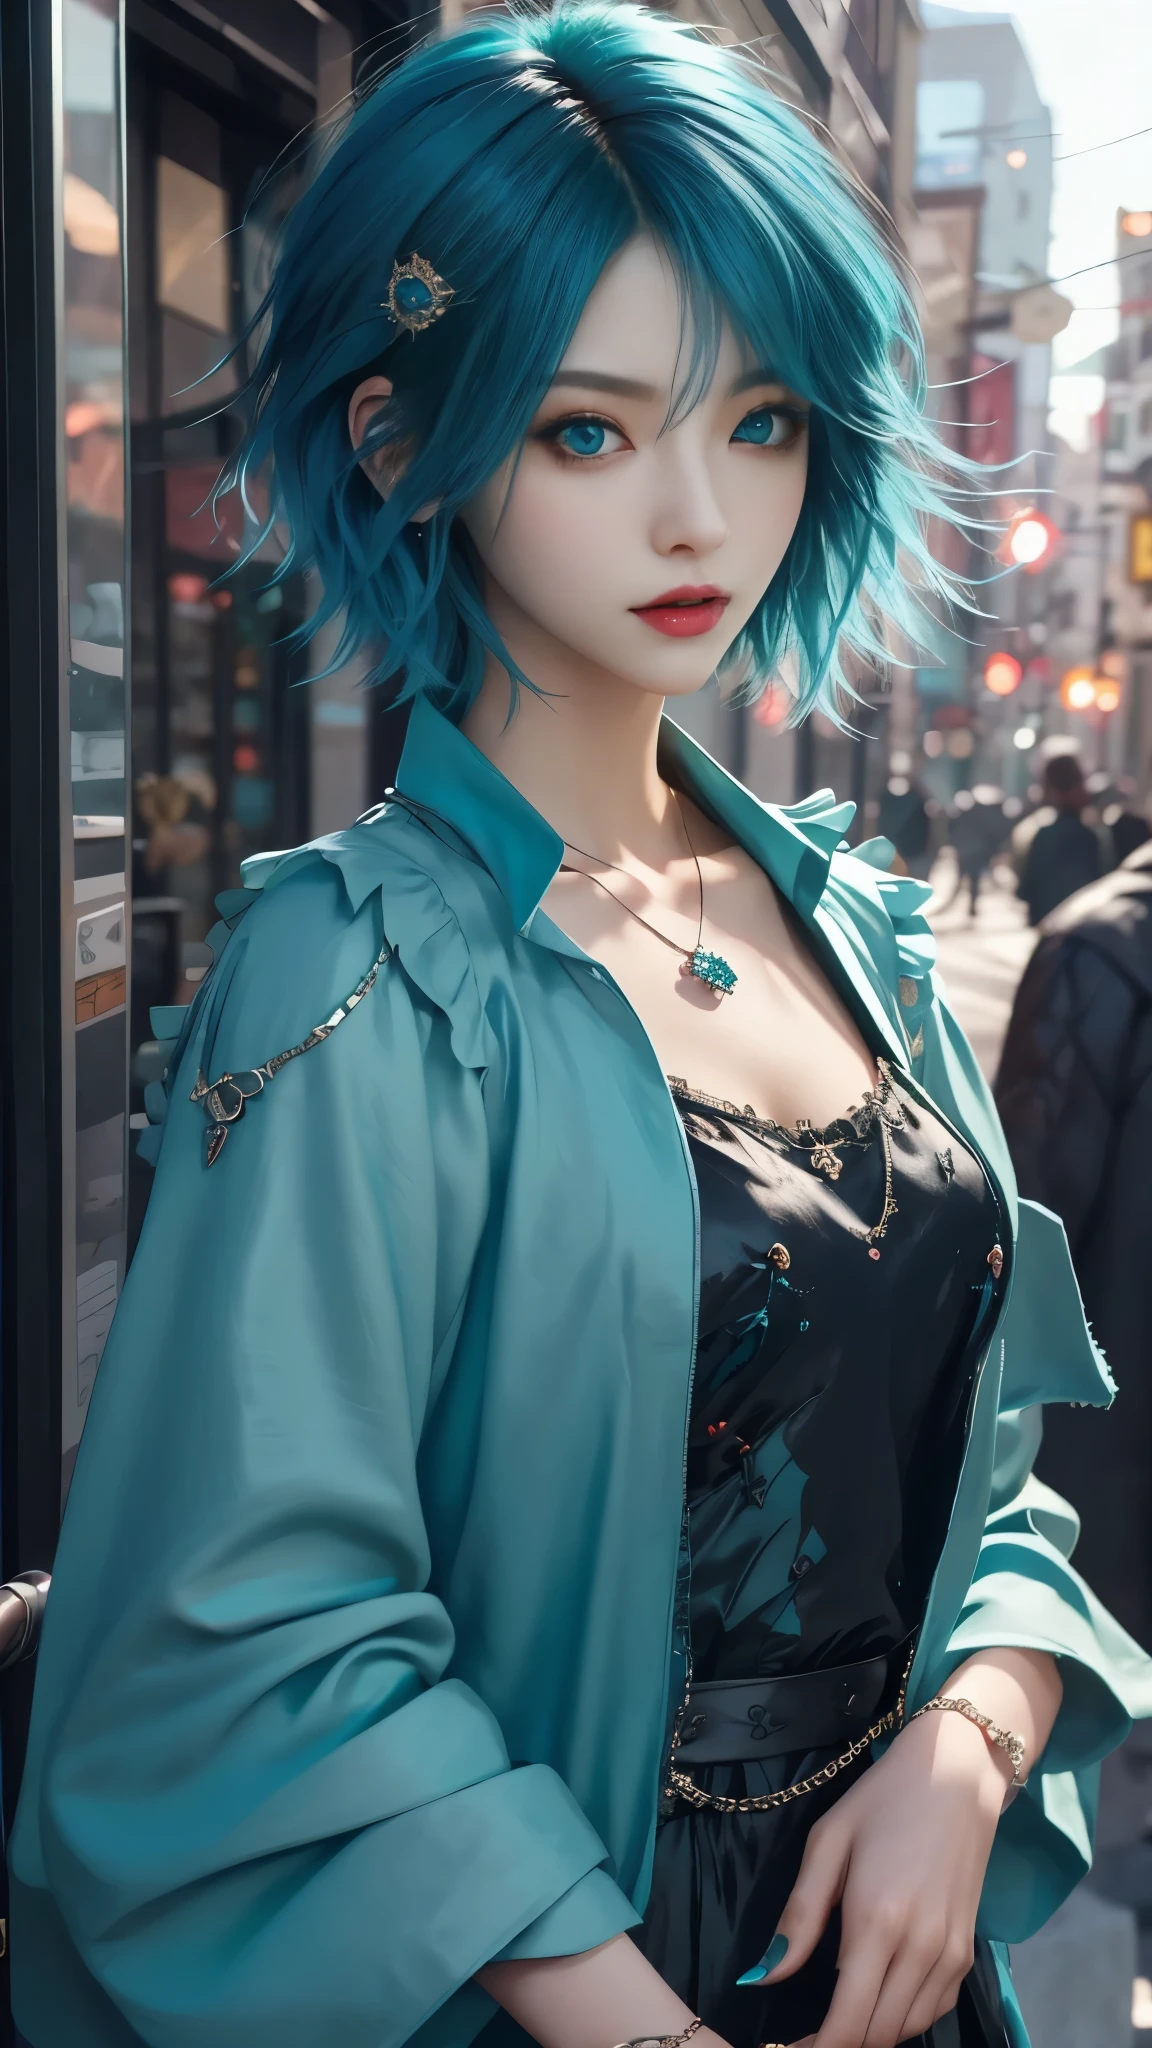 ​masterpiece, top-quality, ((1womanl)), different teal color, finely eye and detailed face, intricate detailes, Casual black and teal attire, window, A smile, Happiness, tenderness, high-level image quality、selfee, Beautuful Women、tall、a small face, D-cups, The upper part of the body、nightfall, nighttime scene、𝓡𝓸𝓶𝓪𝓷𝓽𝓲𝓬、Korea person, Idol Photos, Model photo, k pop, Professional Photos, Vampires, Korean fashion in black and teal, Fedoman with necklace, inspired by Sim Sa-jeong, androgynous vampire, :9 detailed face: 8, extra detailed face, detailed punk hair, ((eyes are deialed)) baggy eyes, Seductive. Highly detailed, semi realistic anime, Vampires, hyperrealistic teen, Delicate androgynous princess, imvu, ((short hair woman)), teal hair woman with wild look, ((Woman with short teal hair)), ((1 persons)),